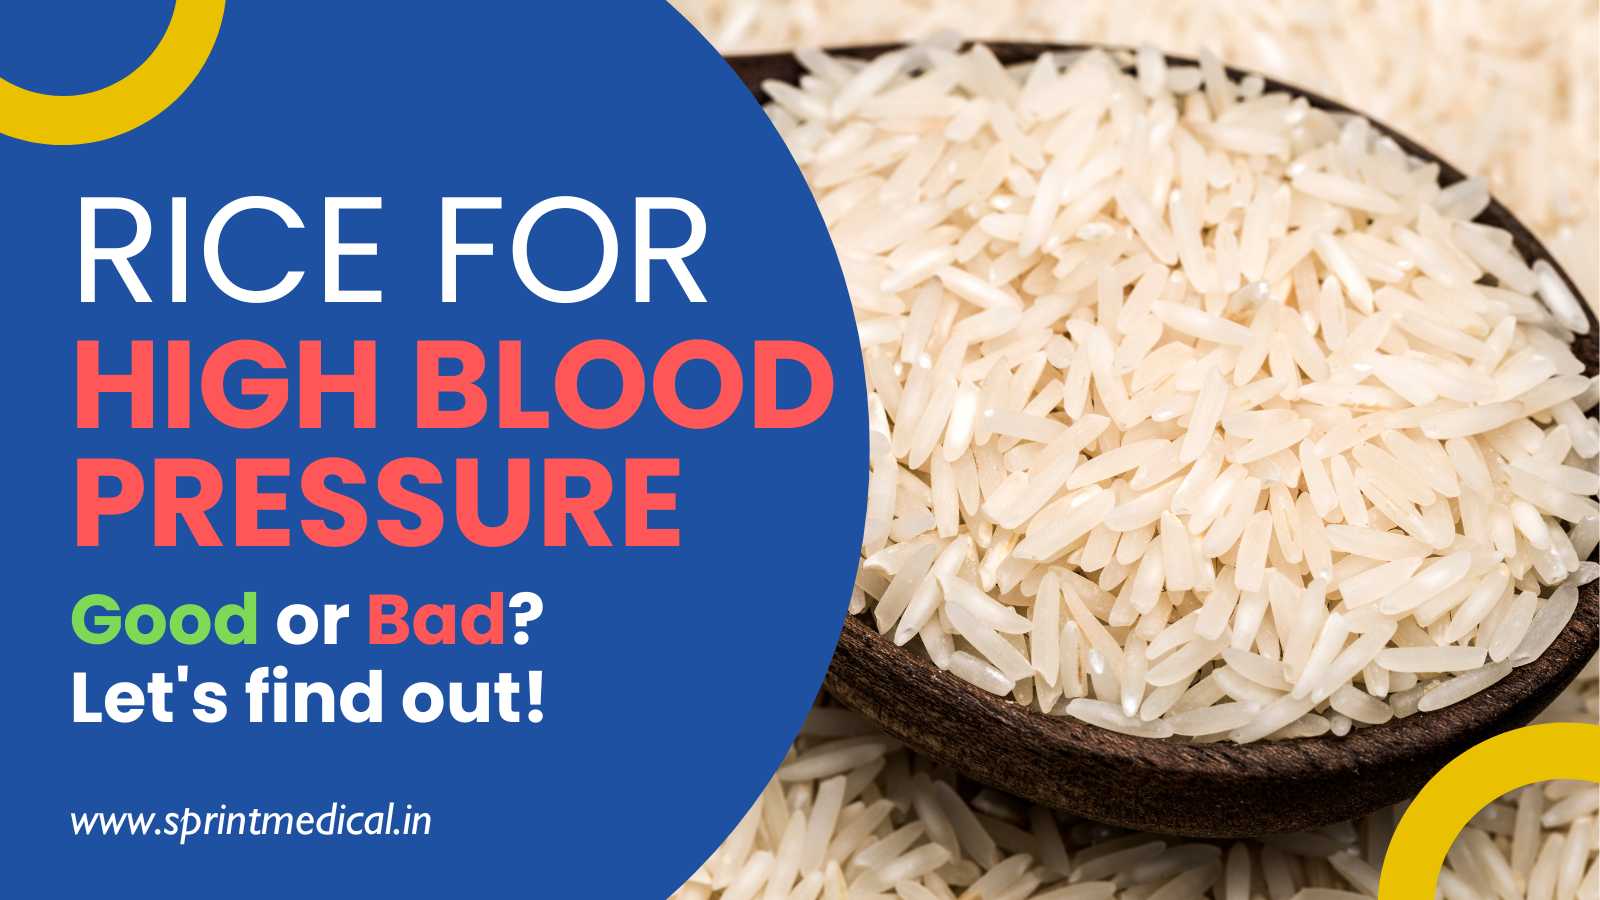 Rice for High Blood Pressure: Good or Bad